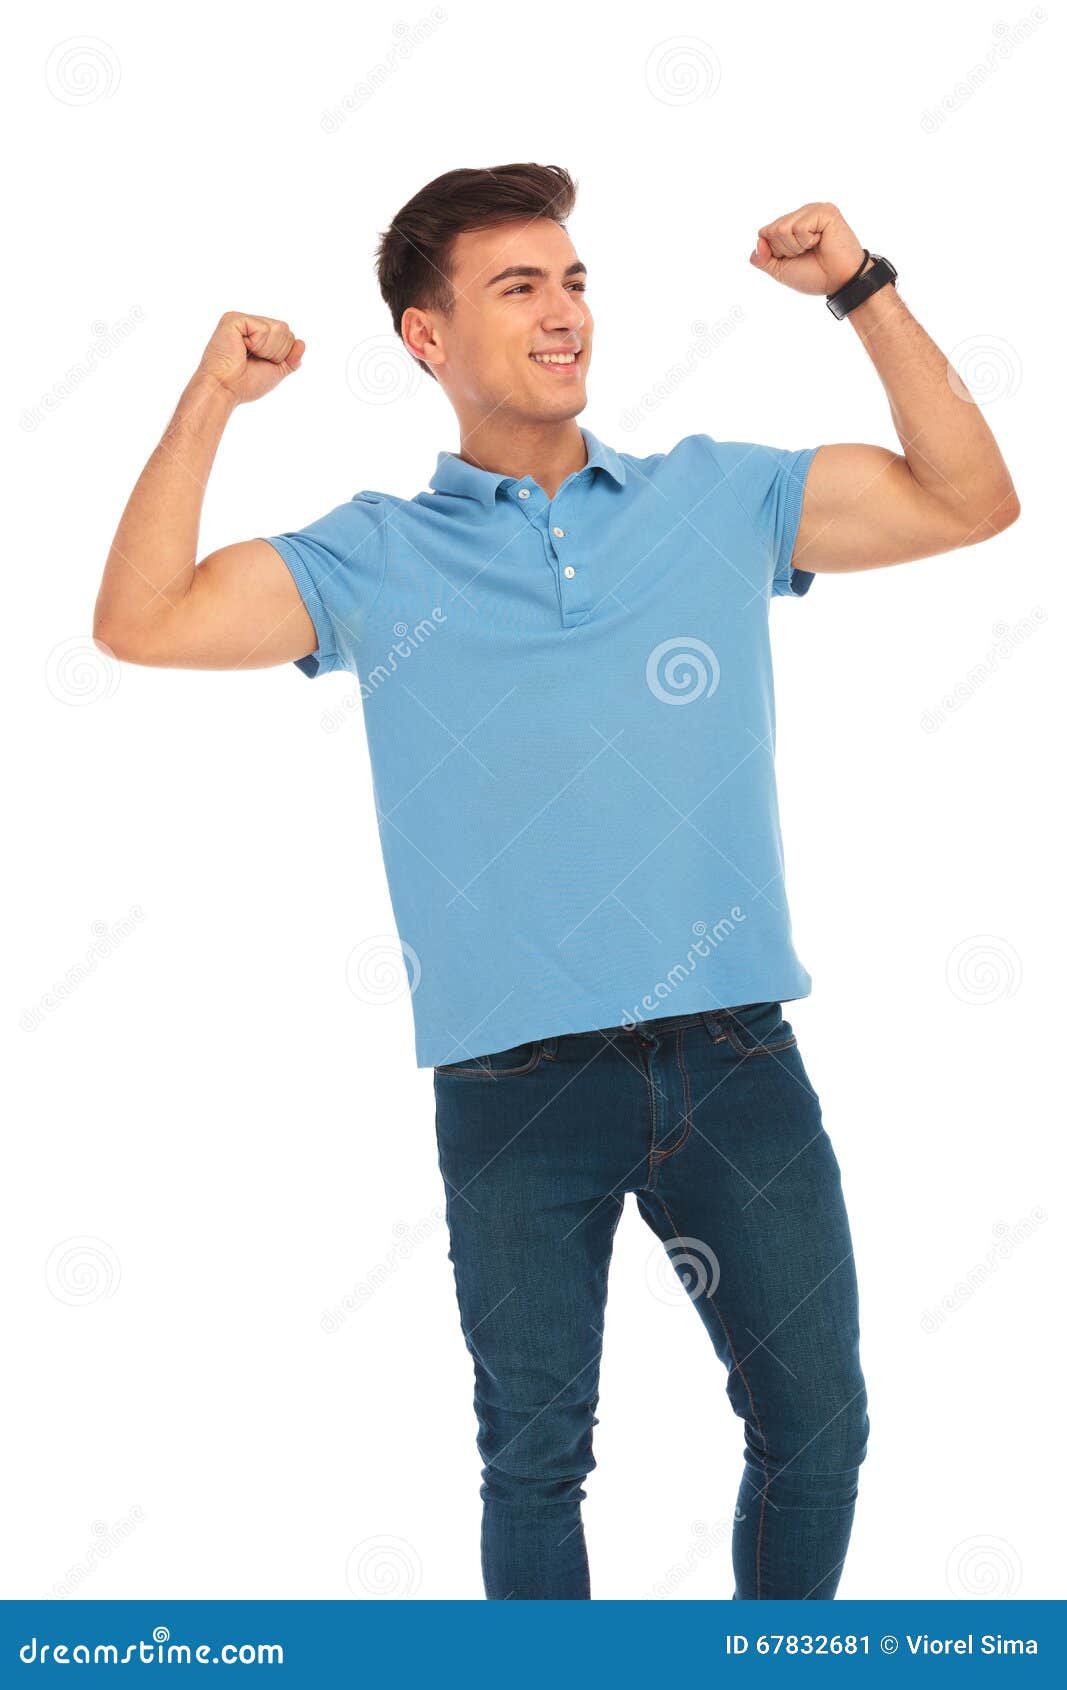 Boy in Blue Shirt Flexing and Celebrating Stock Image - Image of ...